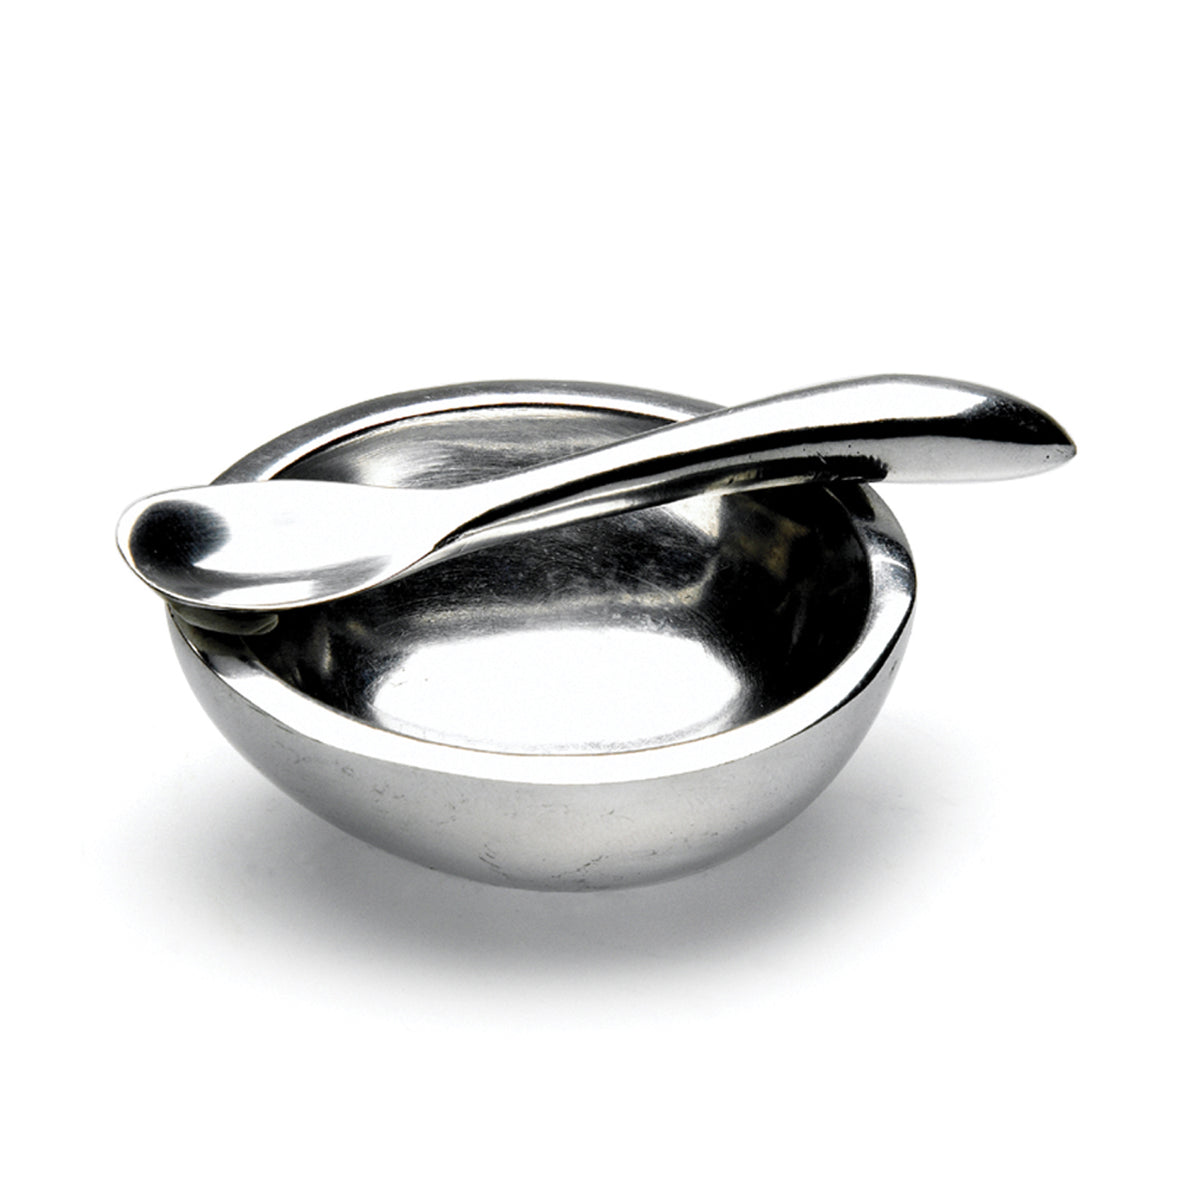 Abbott Collection - Small Bowl with Spoon